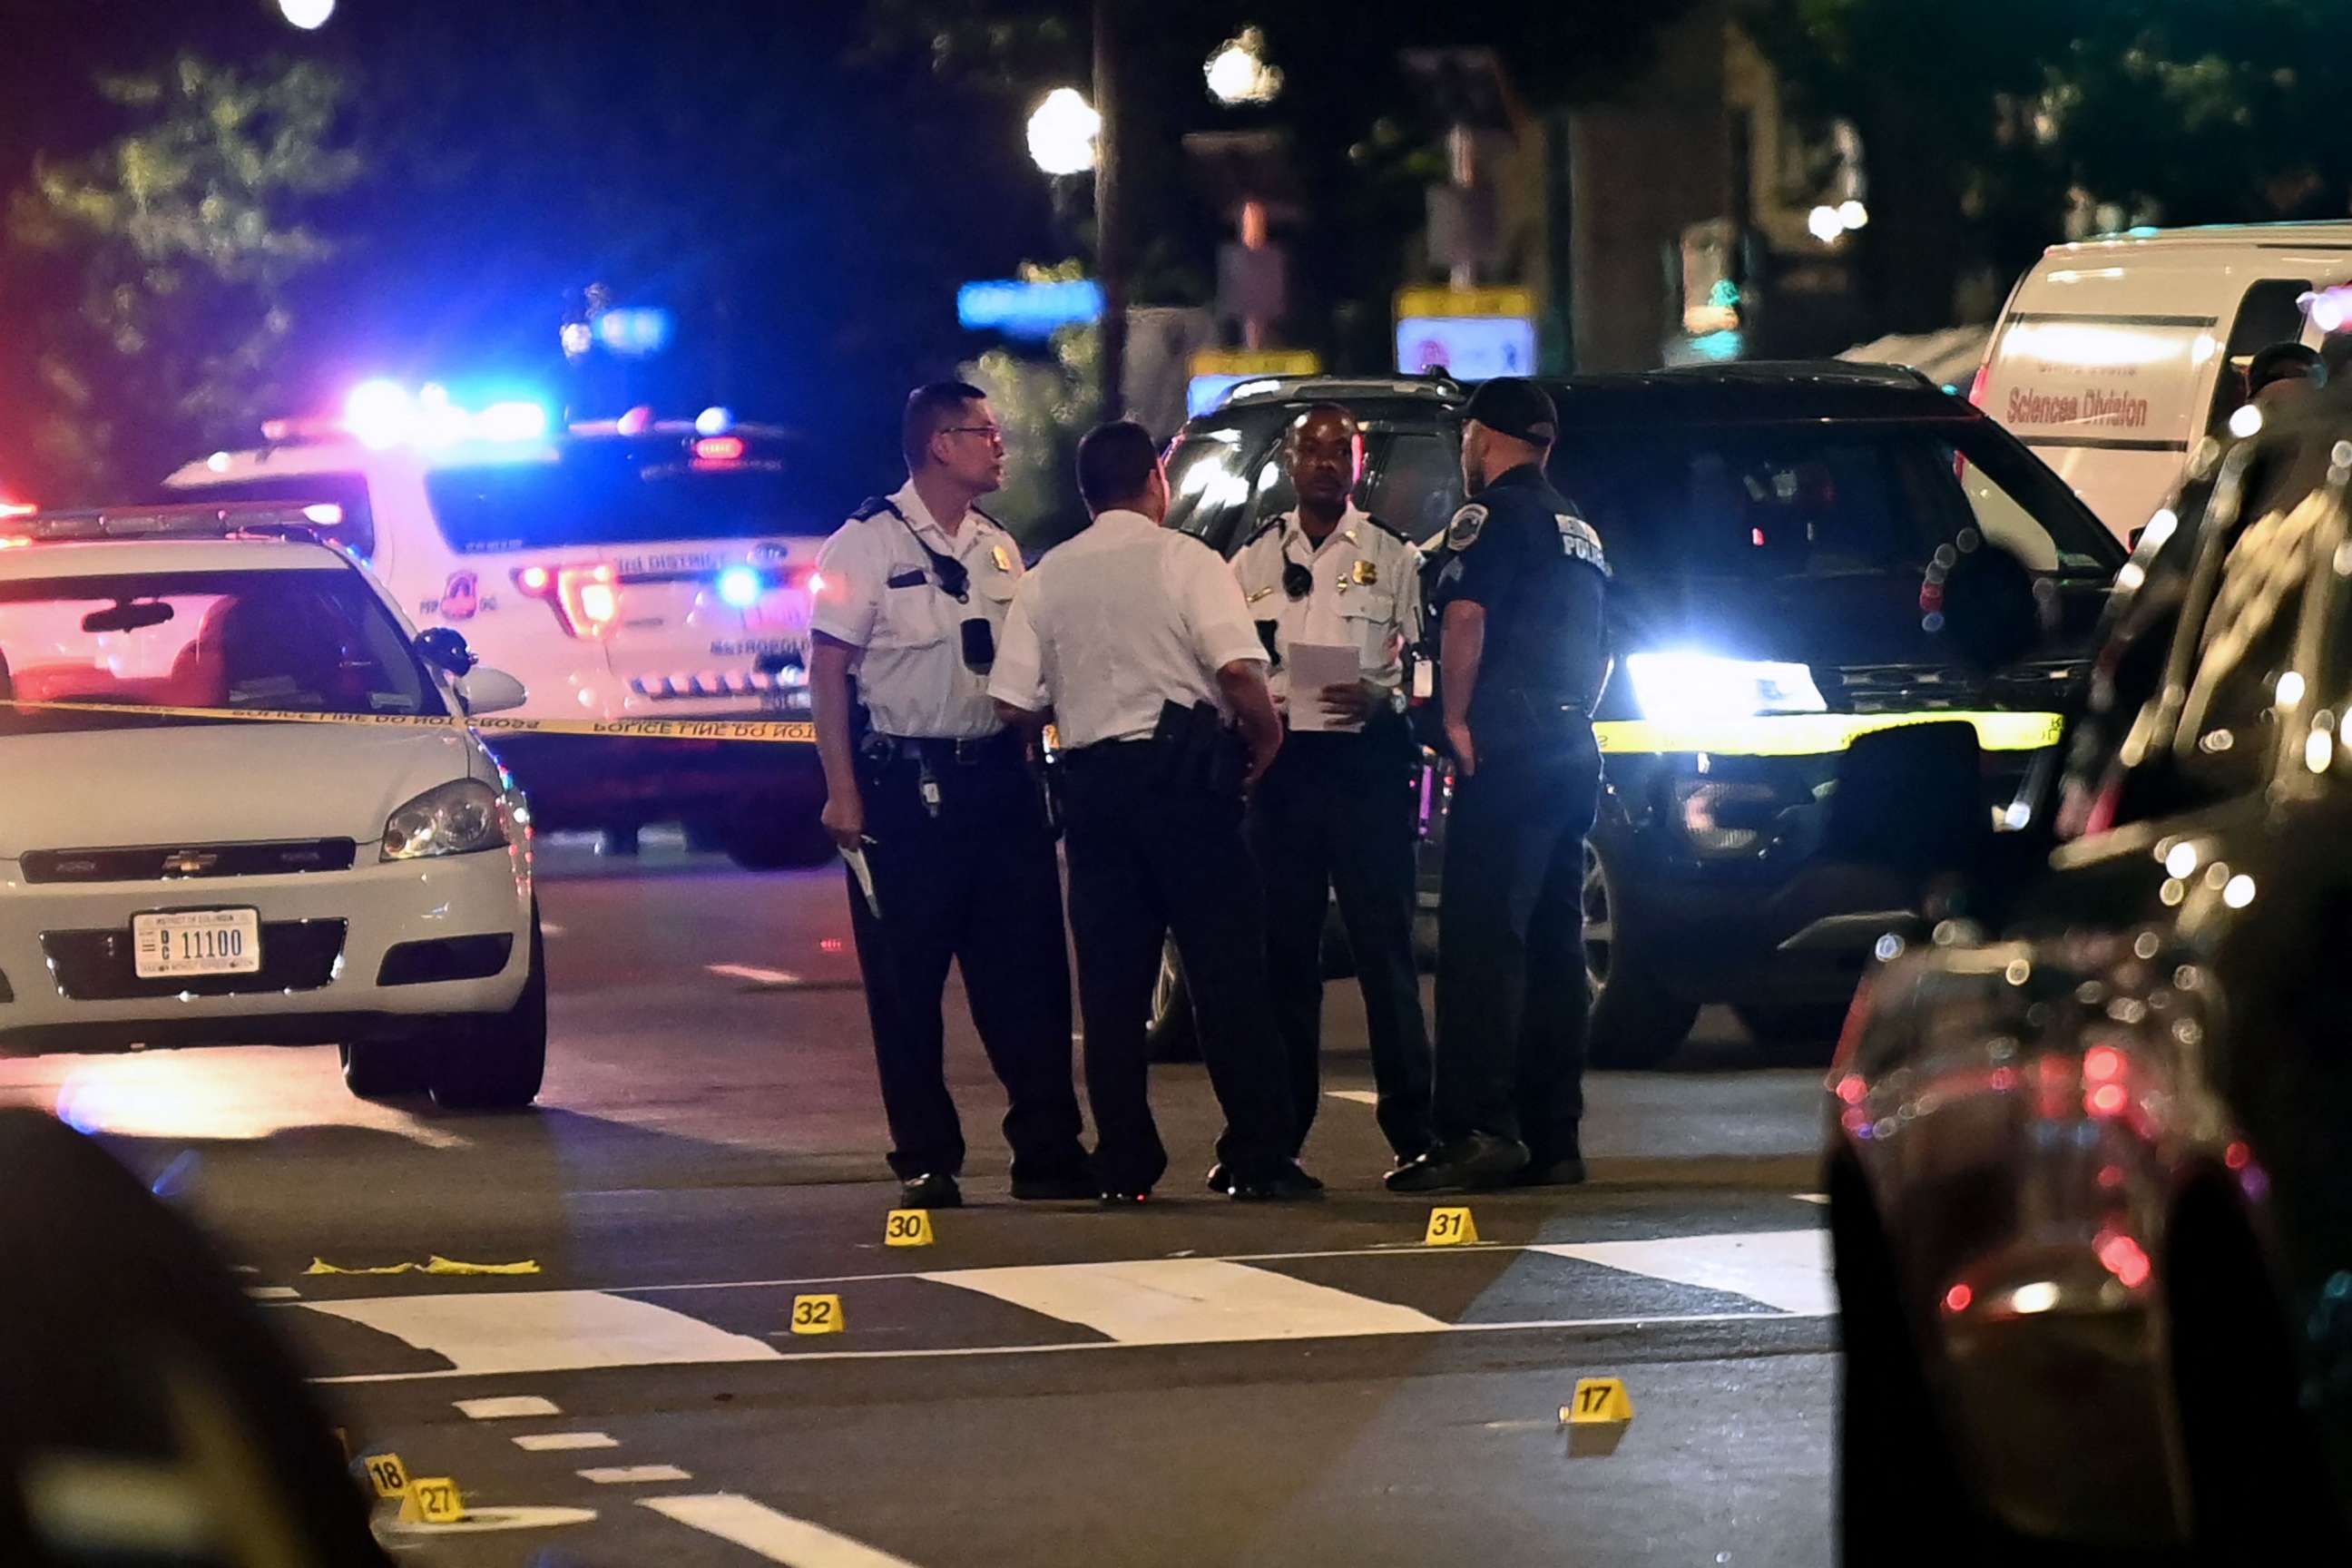 PHOTO: Police officers work at the scene of a shooting outside a restaurant in Washington, D.C., on July 22, 2021.